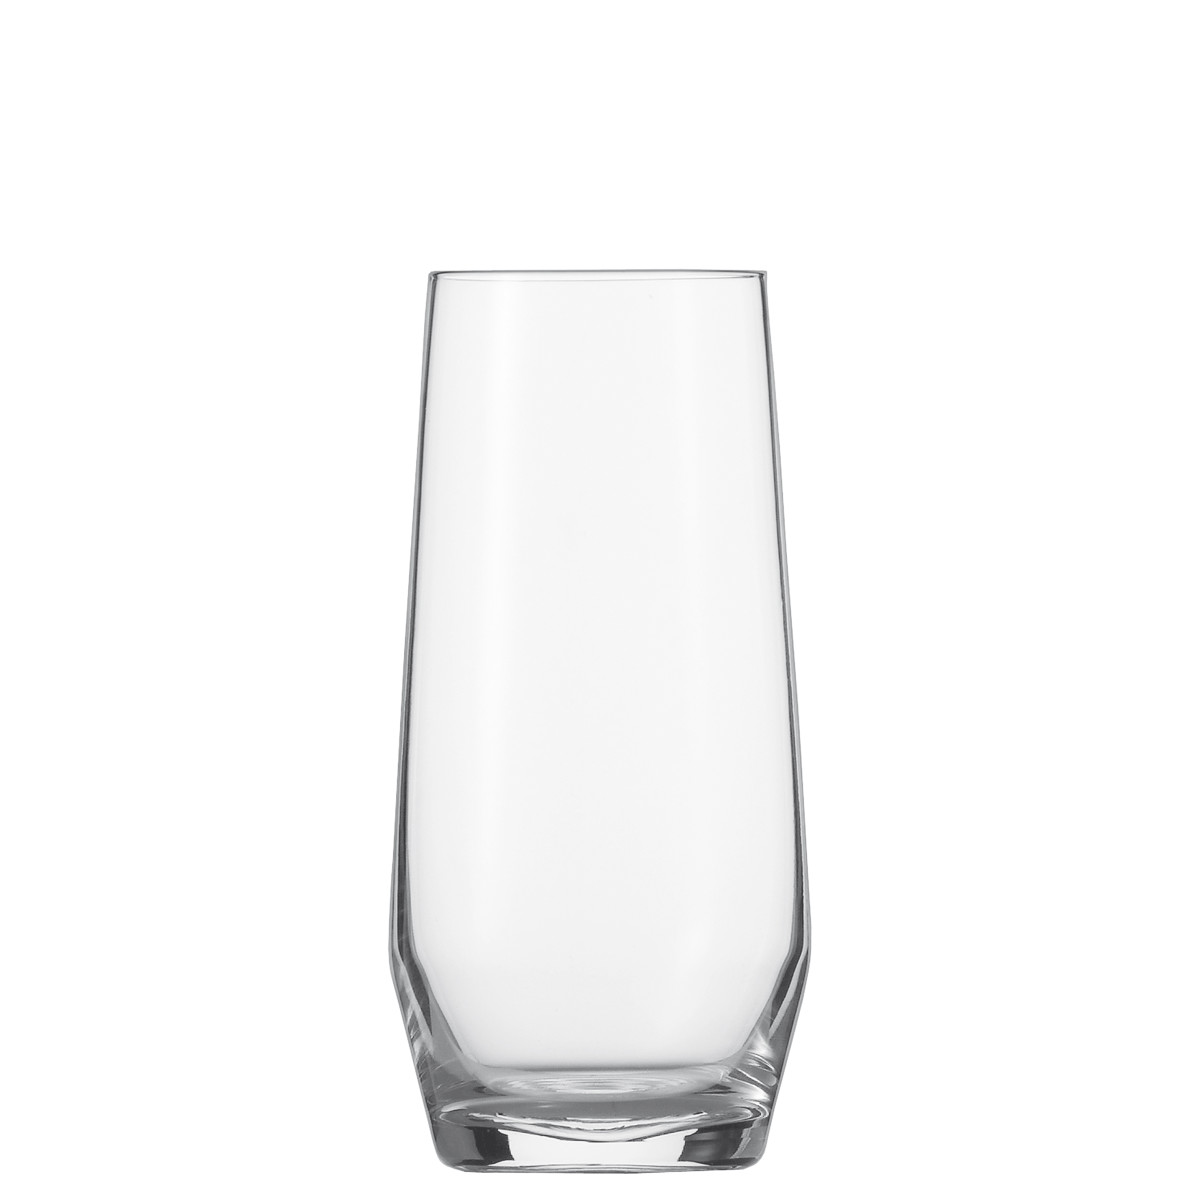 Zwiesel Glas Pure Collins, Set of 6